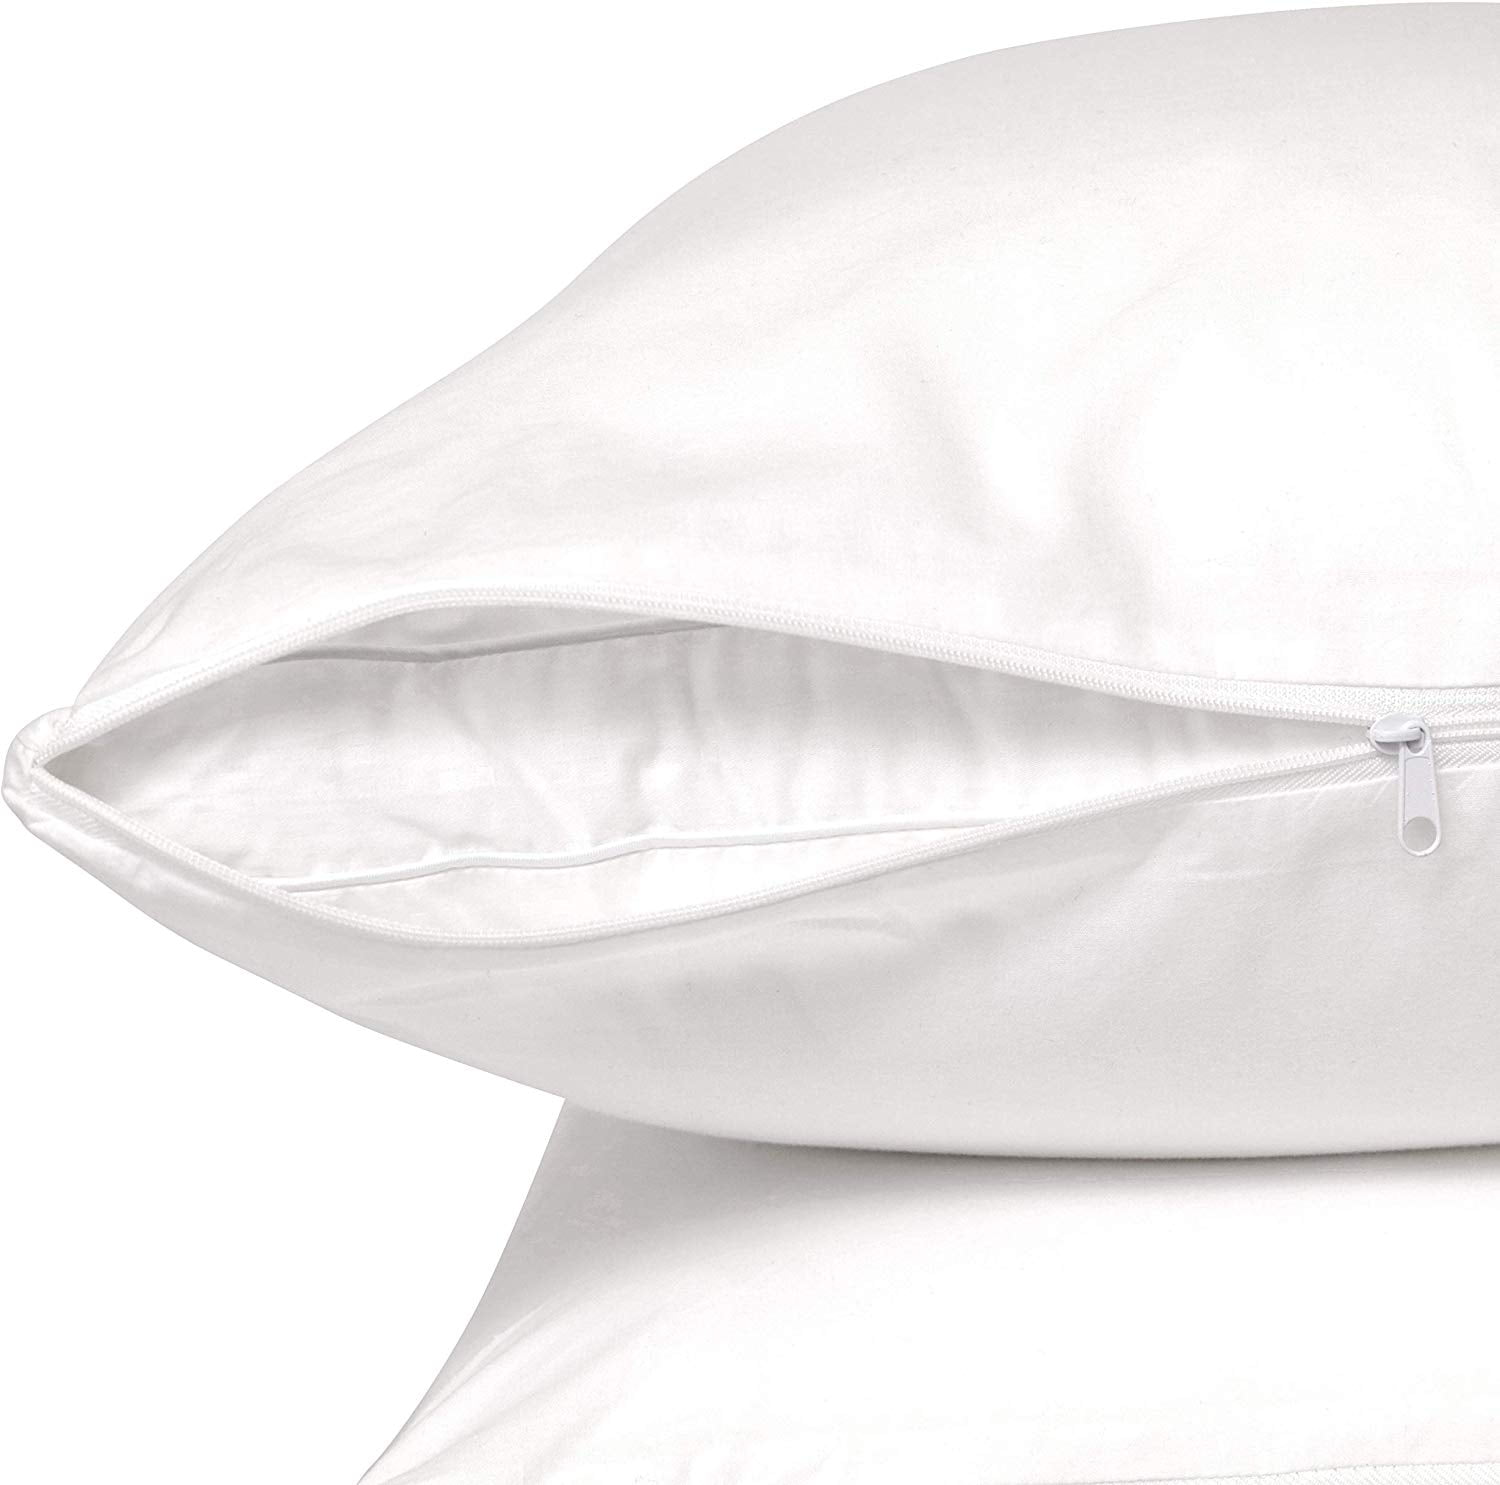 Details about   CIRCLESHOME Zippered Pillow Protectors Standard 8 Pack 100% Cotton Breathable... 